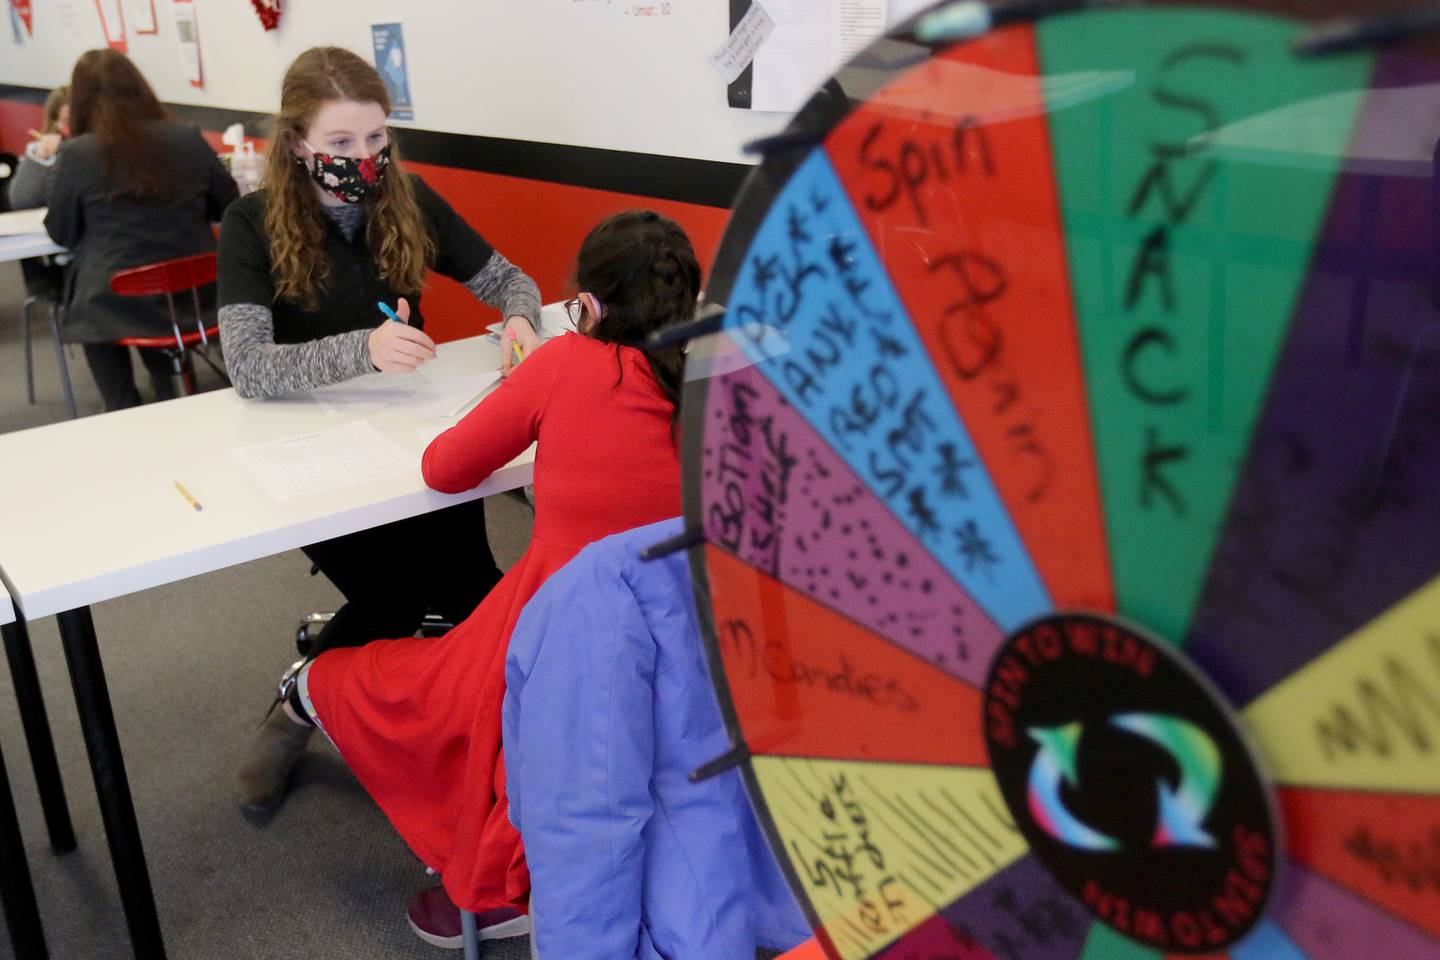 Mathnasium tutor Grace Clark, a senior at Jacobs High School, helps fourth grade student Sarah Cartwright with math problems at Mathnasium on Thursday, Feb. 11, 2021 in Algonquin.